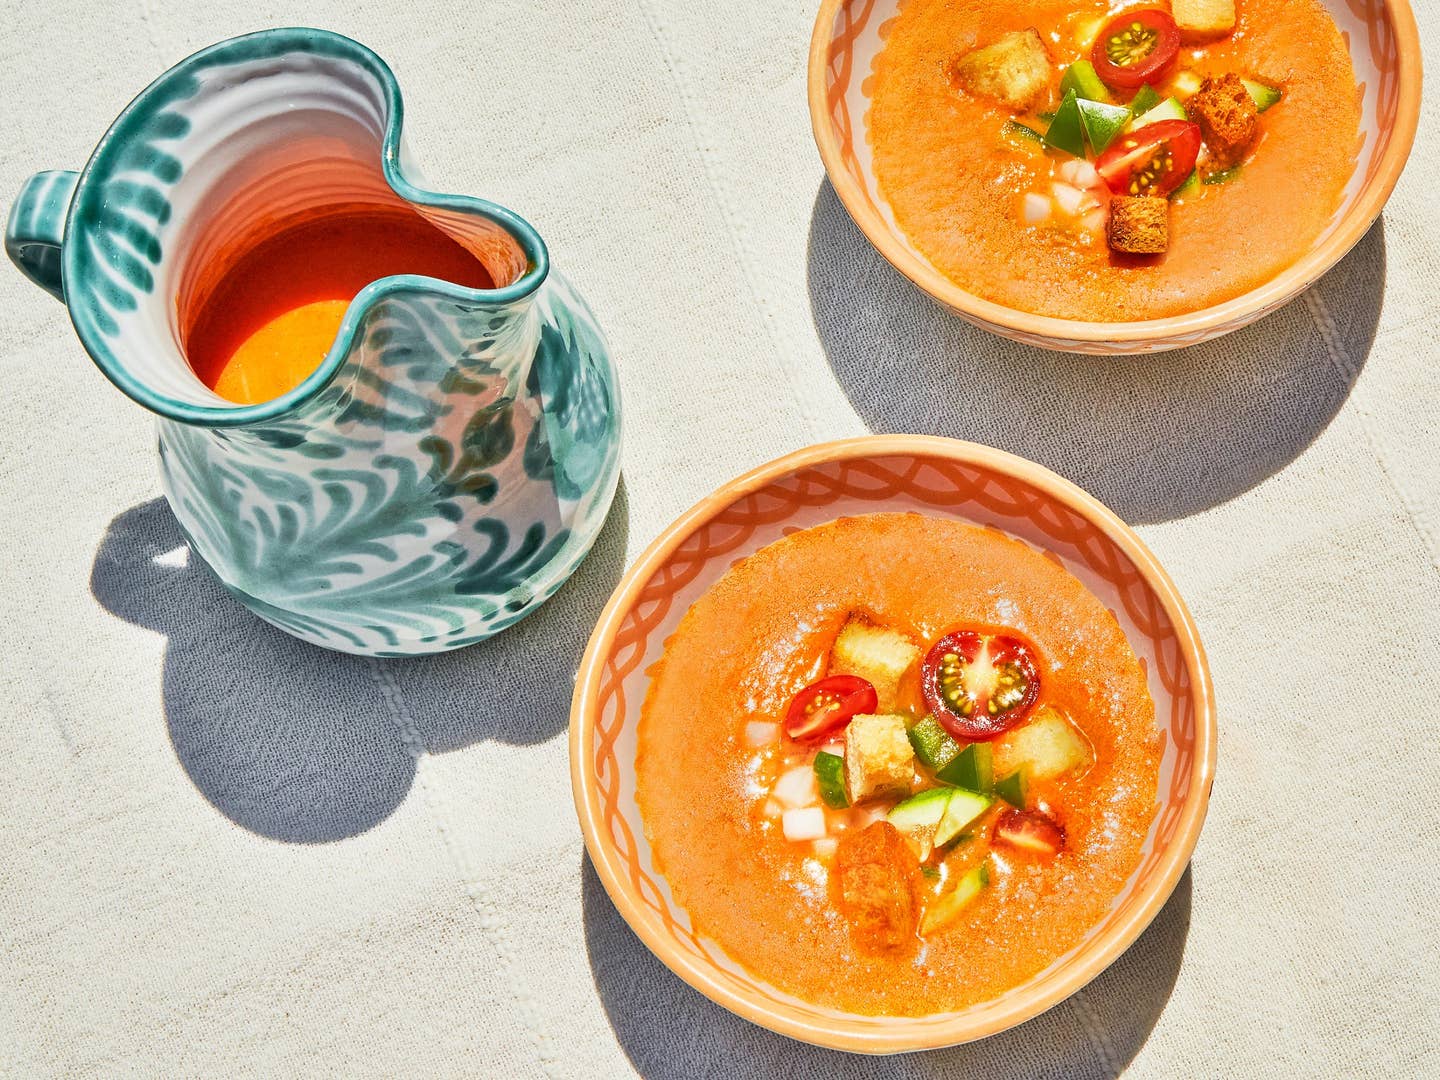 Spanish-Style Gazpacho is the Perfect Soup to Beat the Heat